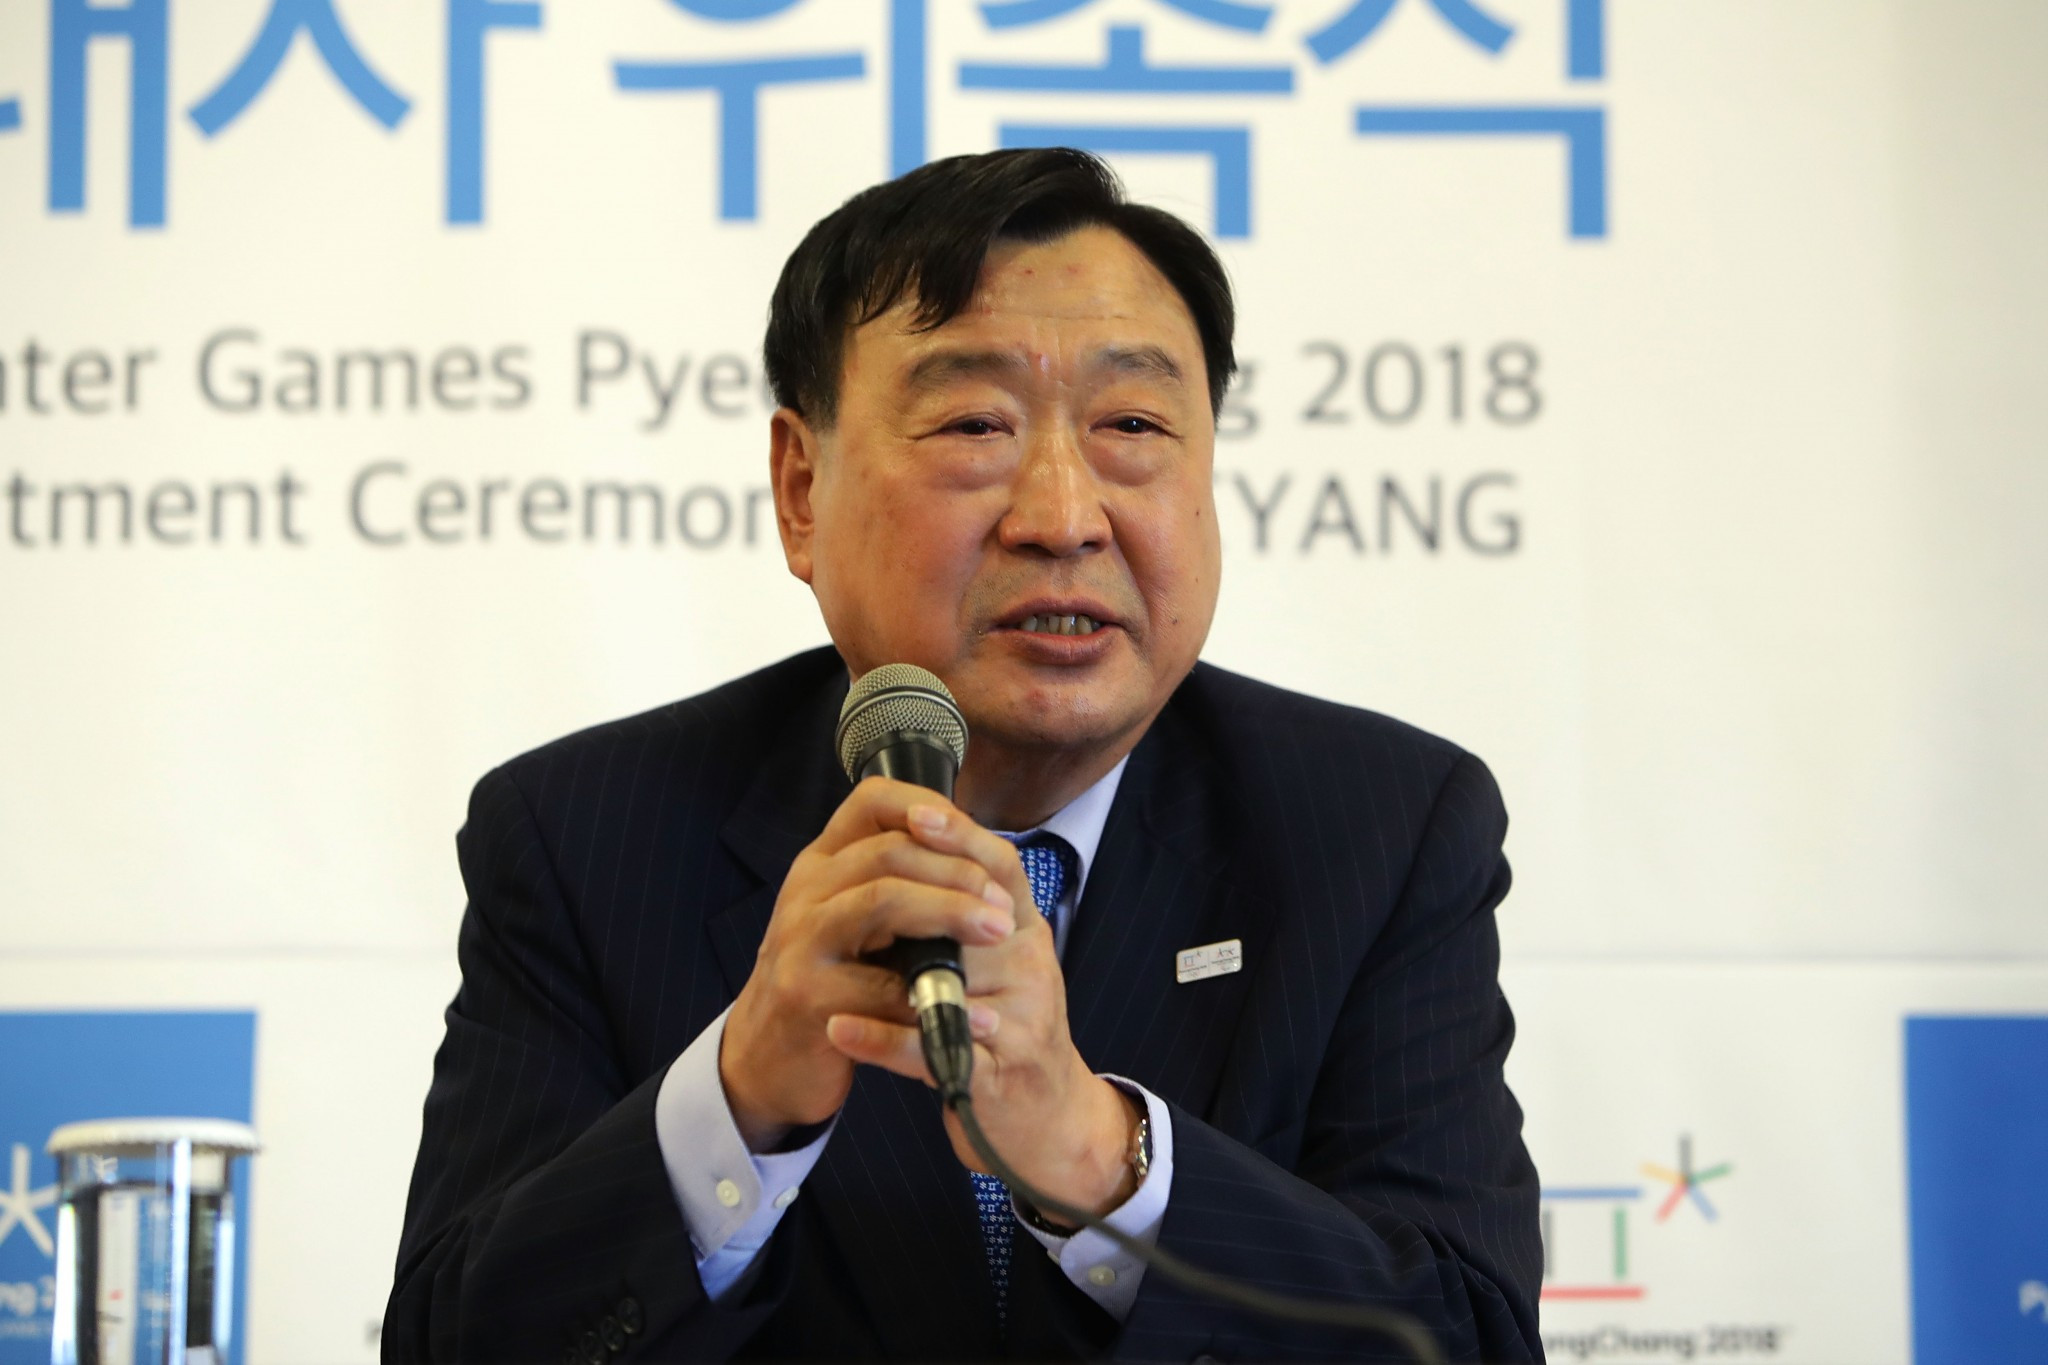 Pyeongchang 2018 President Lee Hee-beom has attempted to minimise the impact that the current threat posed by North Korea could have on the Winter Olympic and Paralympic Games ©Getty Images